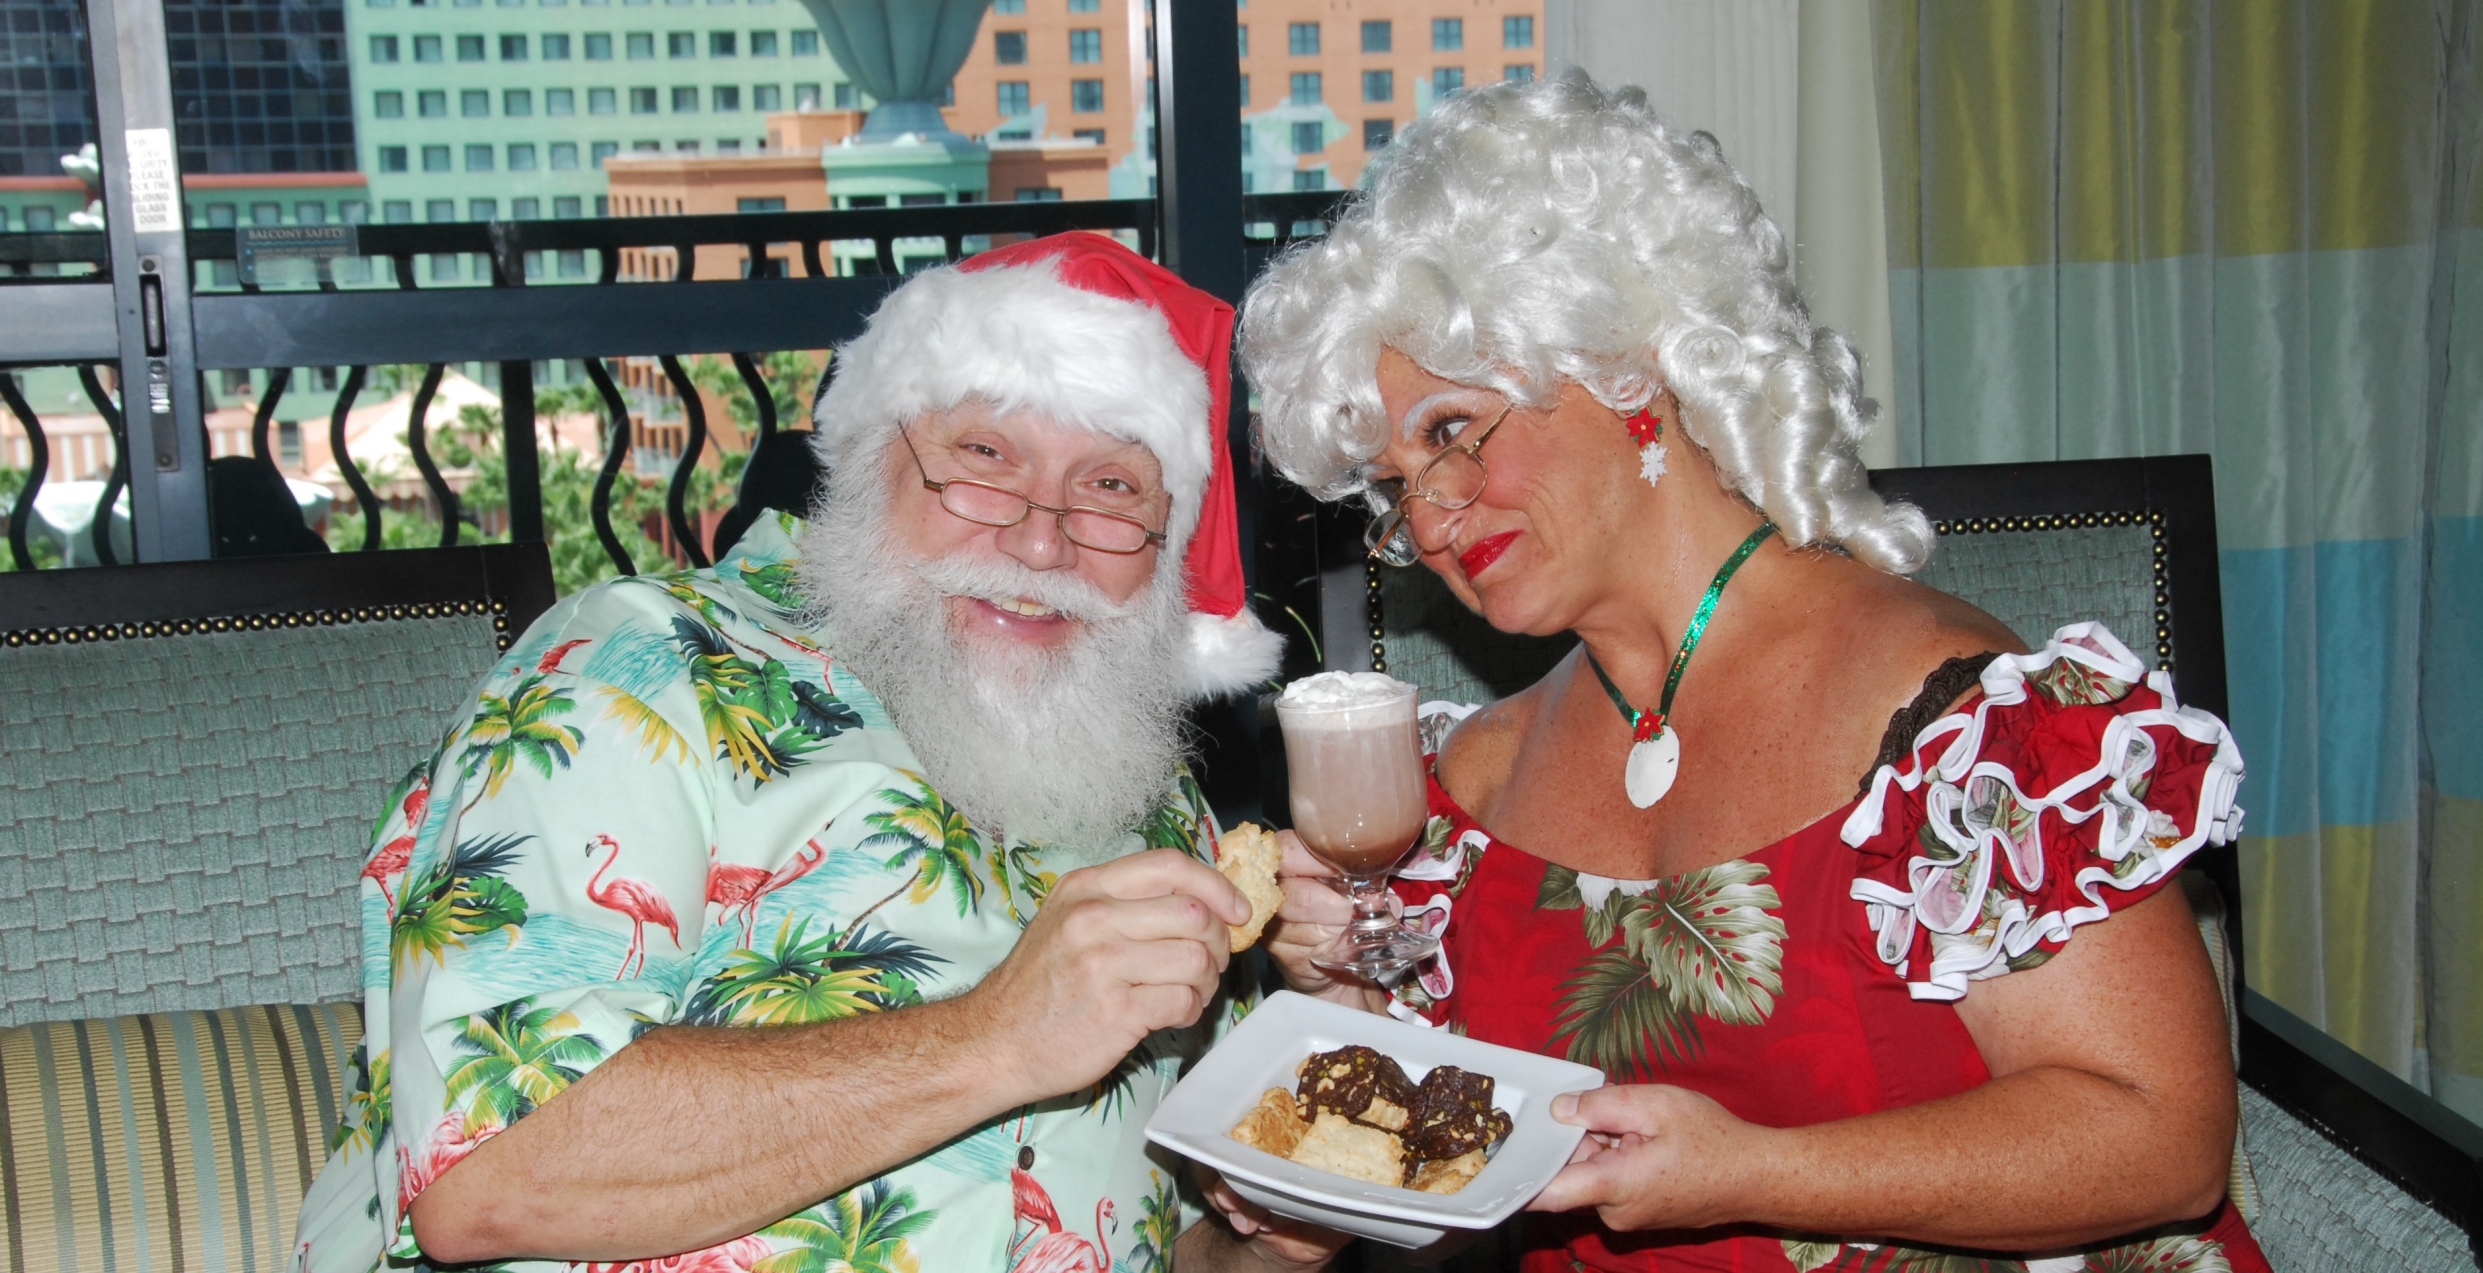 Santa and Mrs. Claus enjoying a little snack